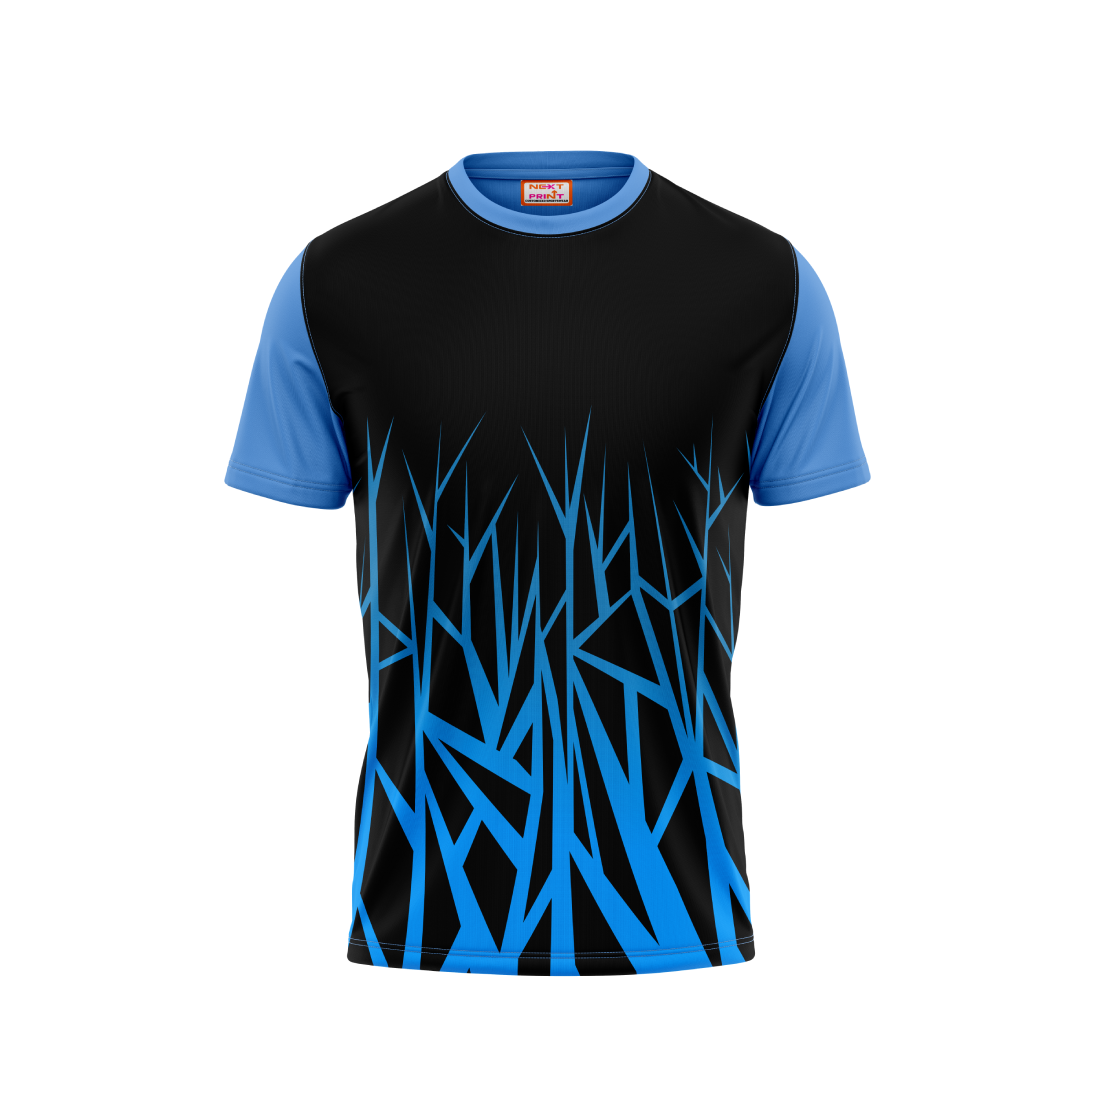 Round Neck Printed Jersey Skyblue NP50000164